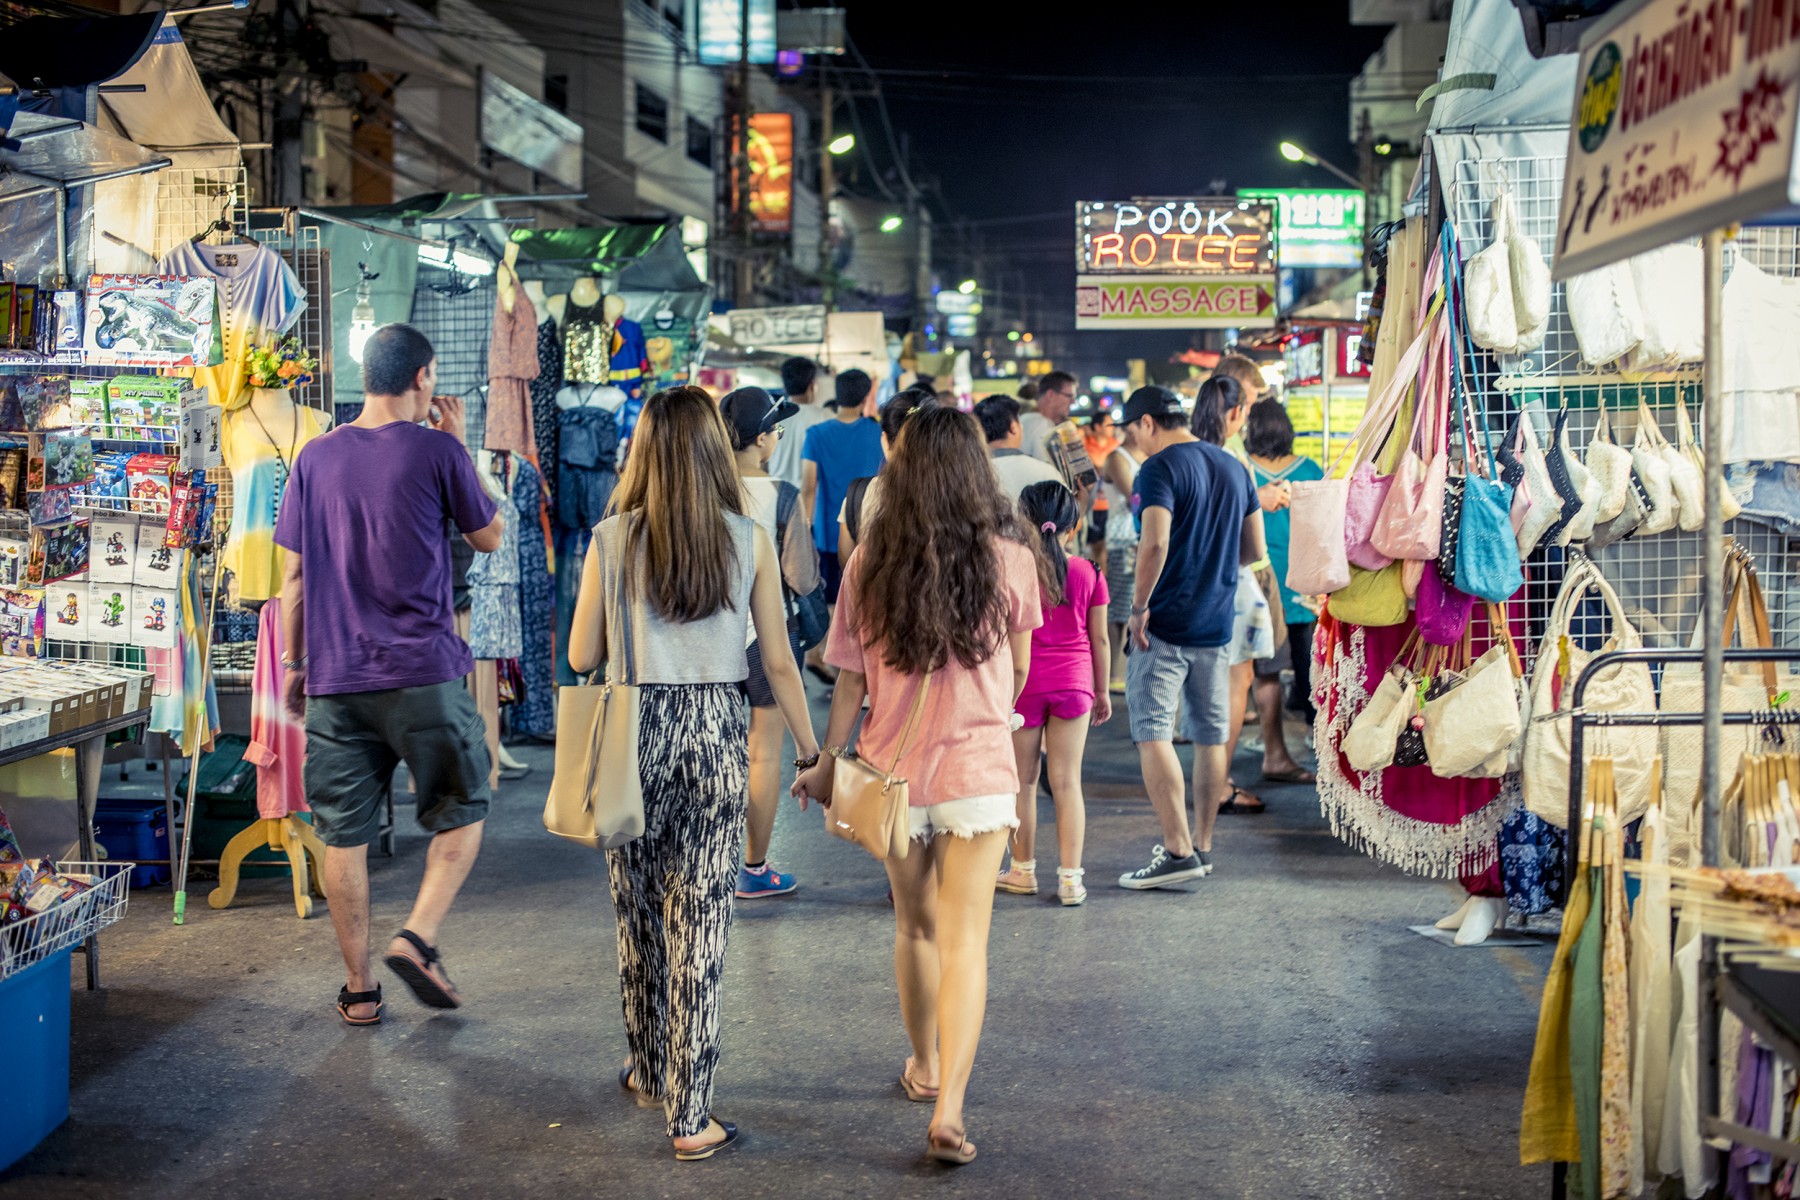 hua-hin-night-market-everything-you-should-know